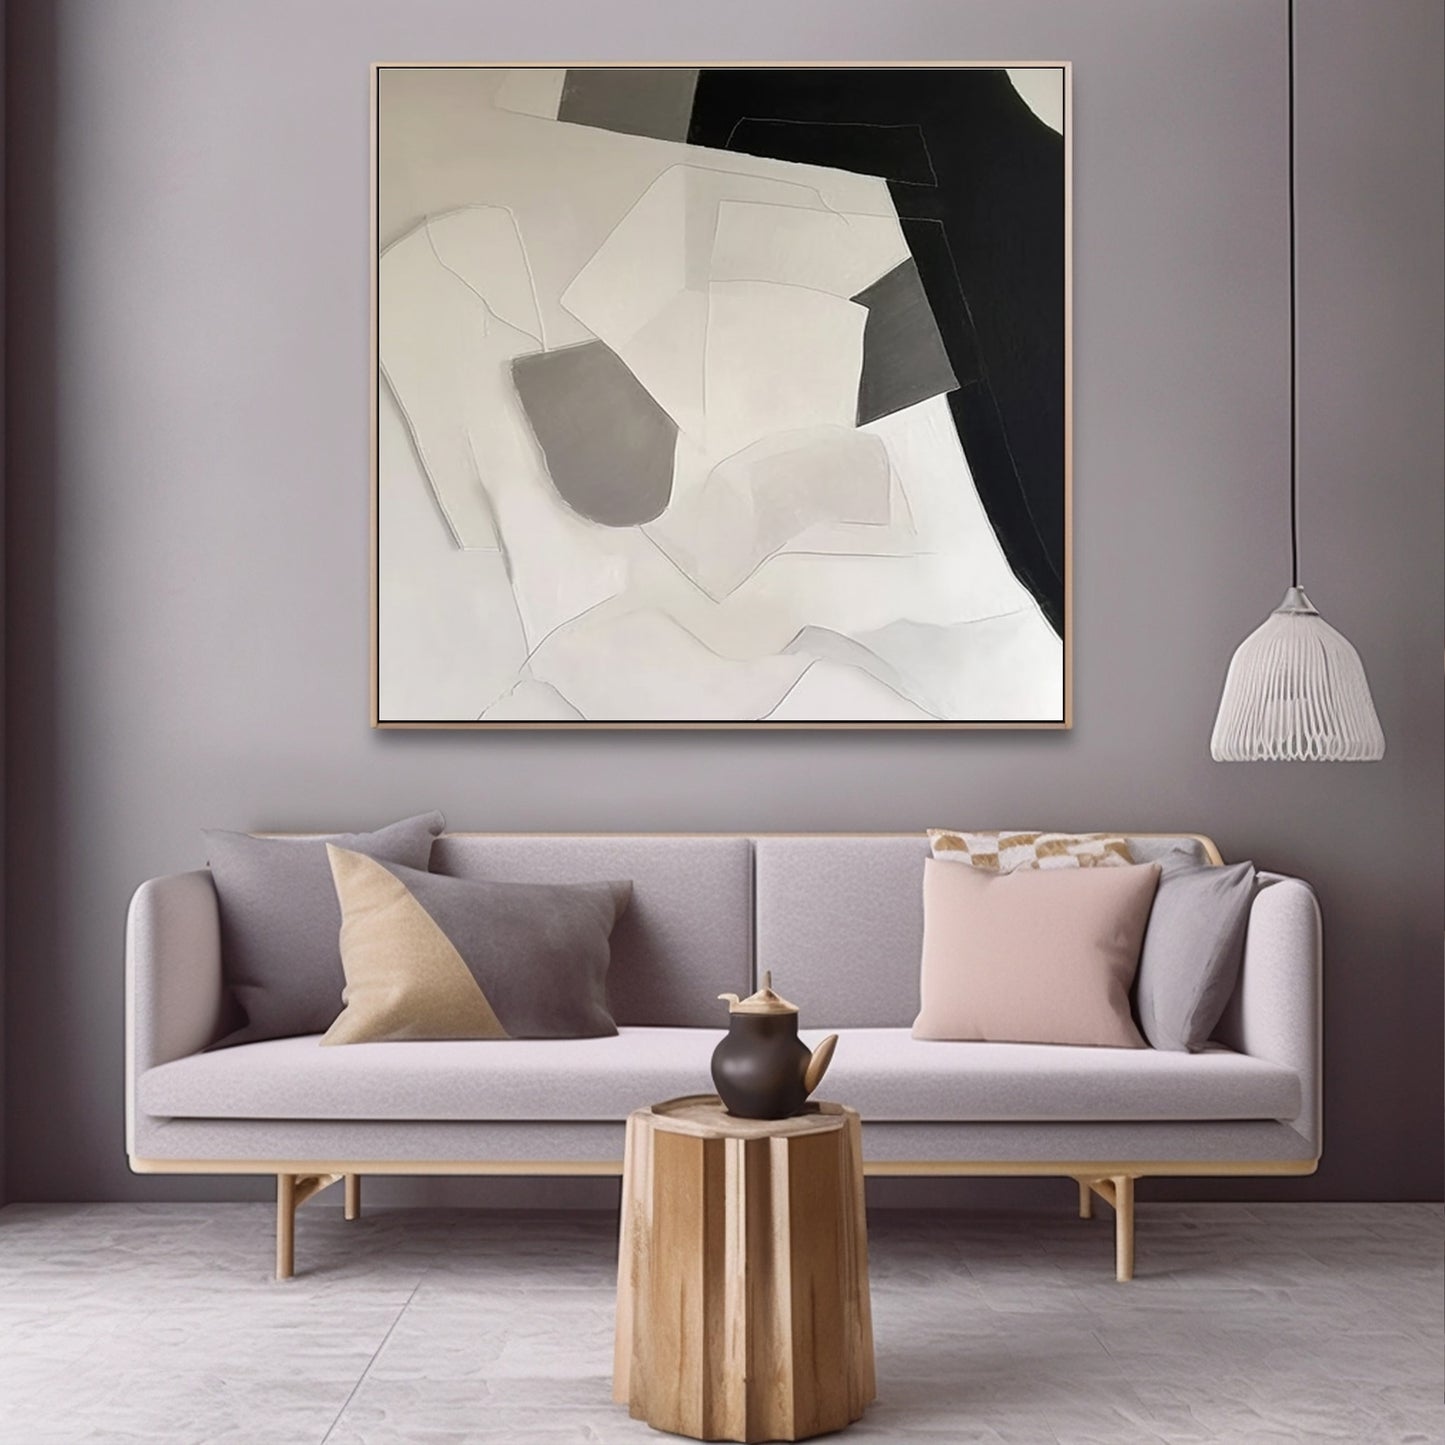 Original Abstract Art Acrylic Paintings Abstract Wall Art Canvas Wall Art For Living room Black and White SKU-BW23-31